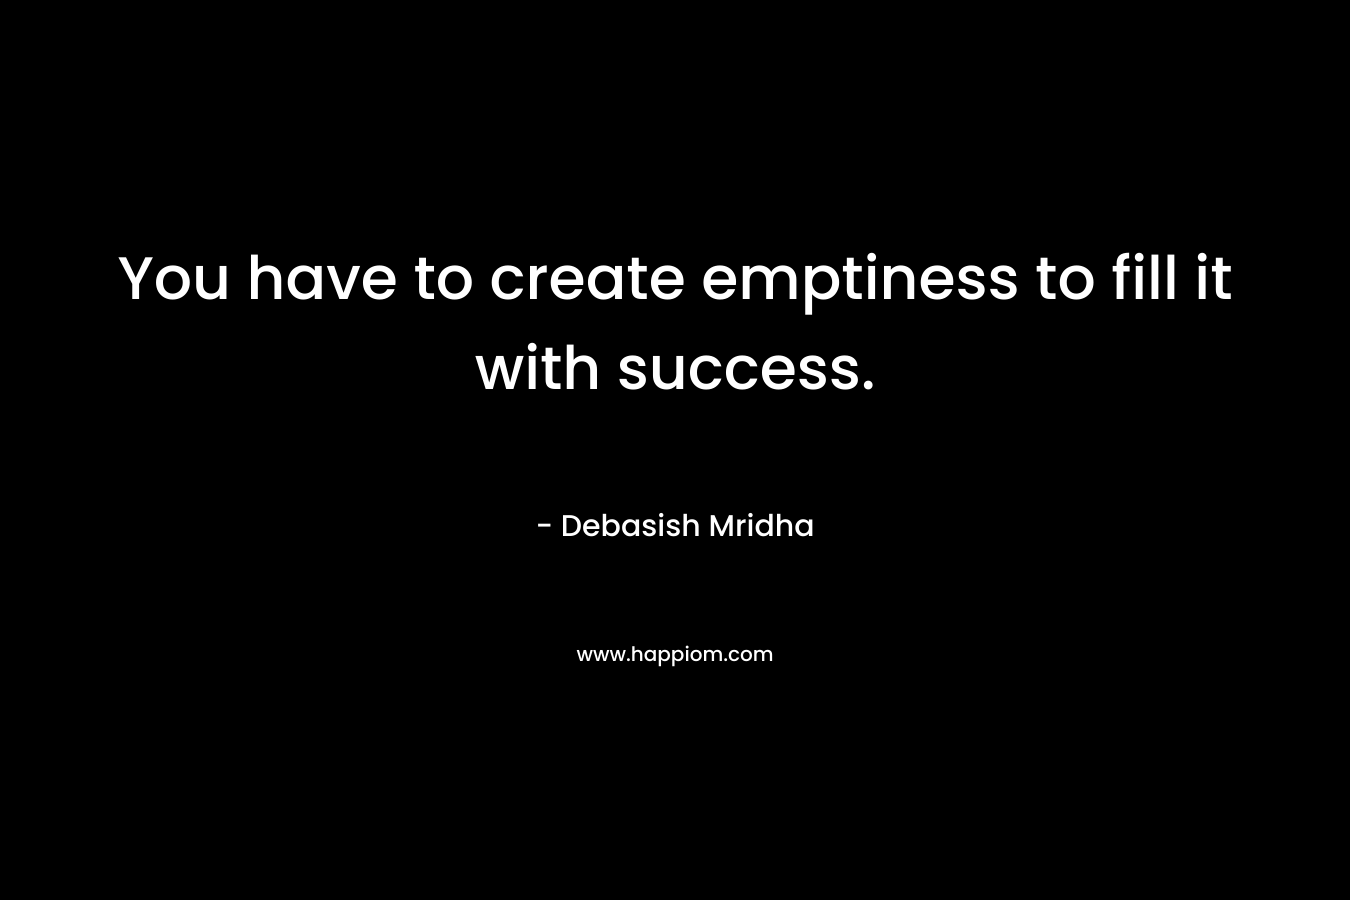 You have to create emptiness to fill it with success.